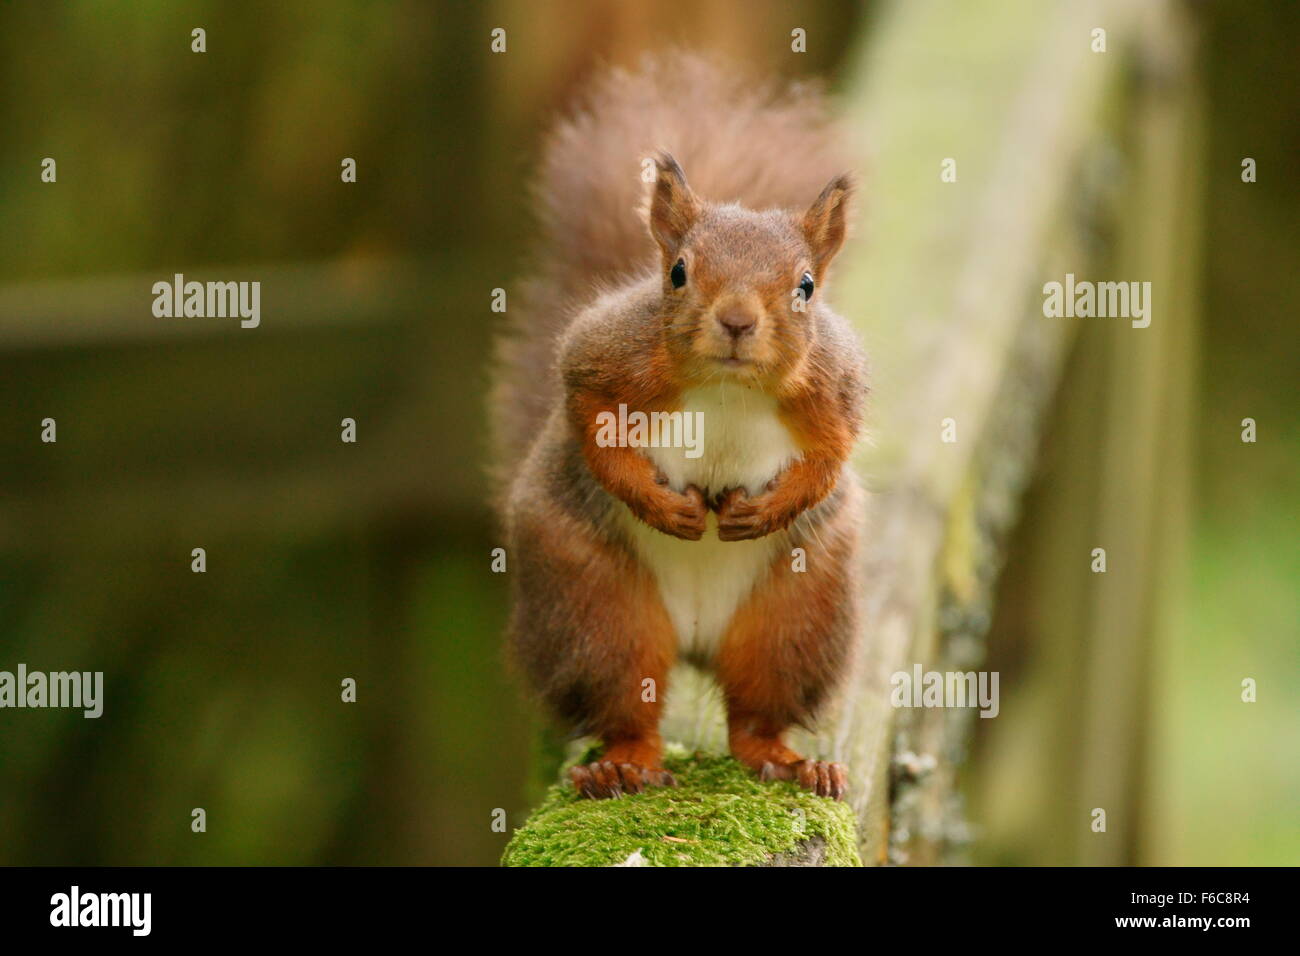 Curious red squirrel approaches for a closer look Stock Photo